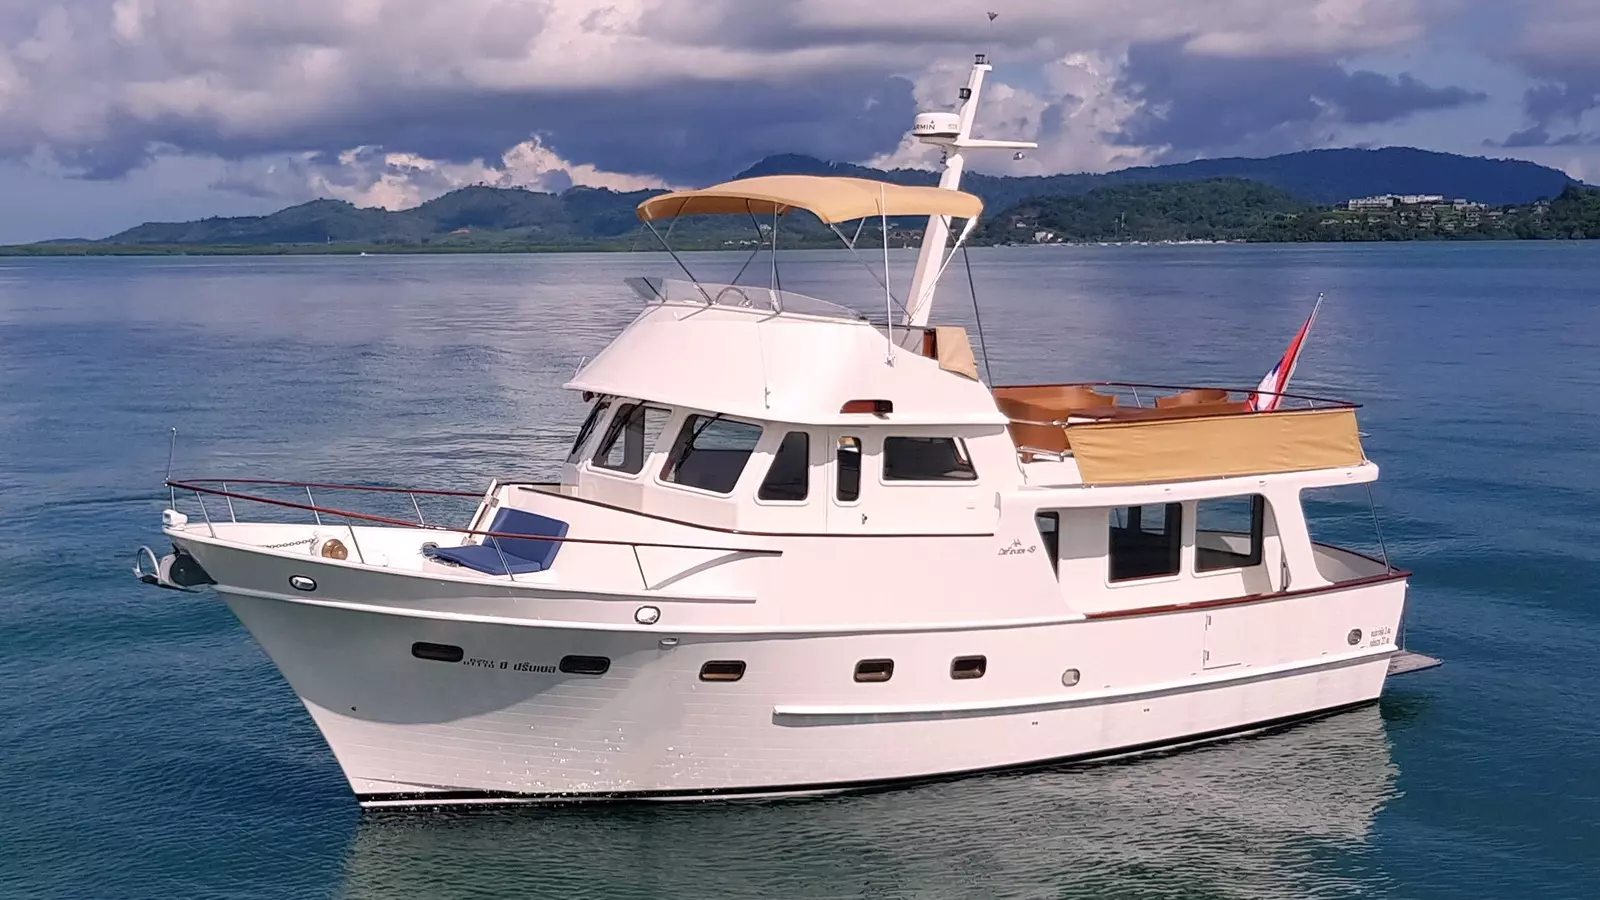 Sea Princess by Defever - Top rates for a Rental of a private Motor Yacht in Thailand